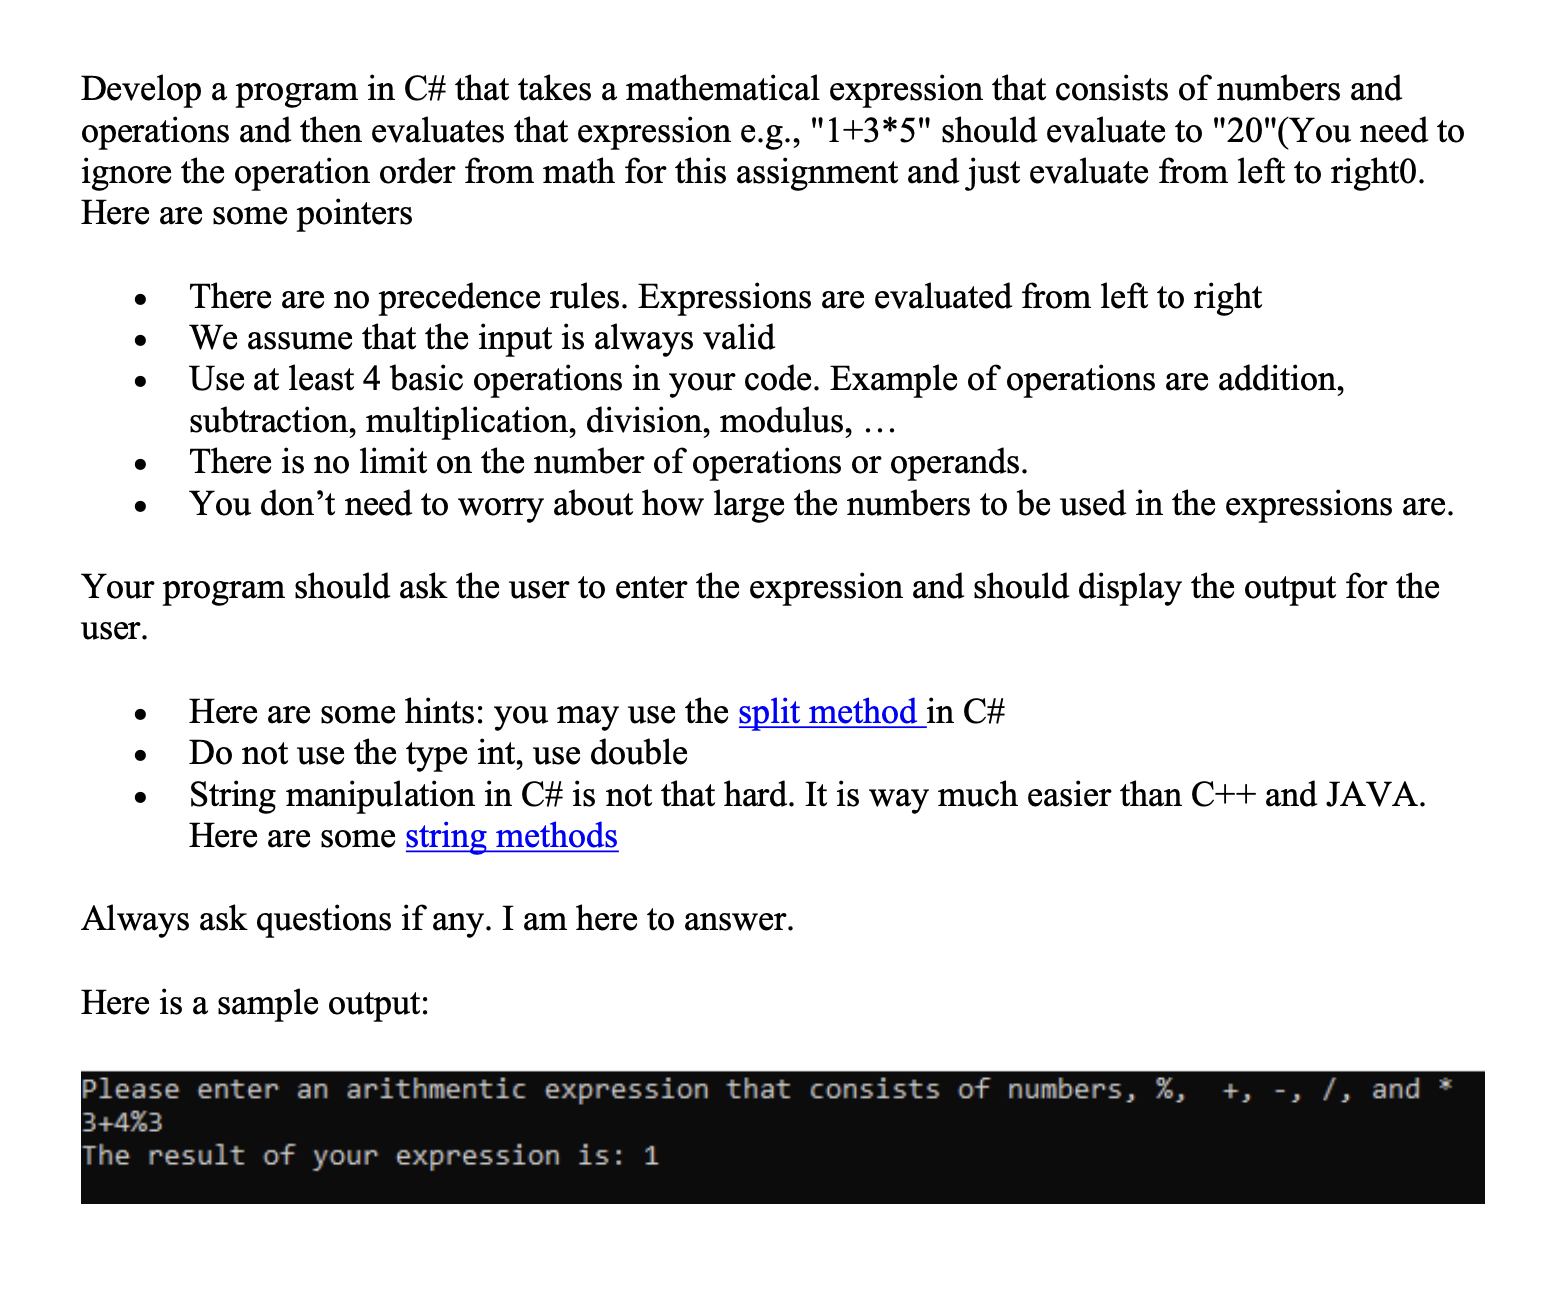 Develop a program in C# that takes a mathematical expression that consists of numbers and operations and then